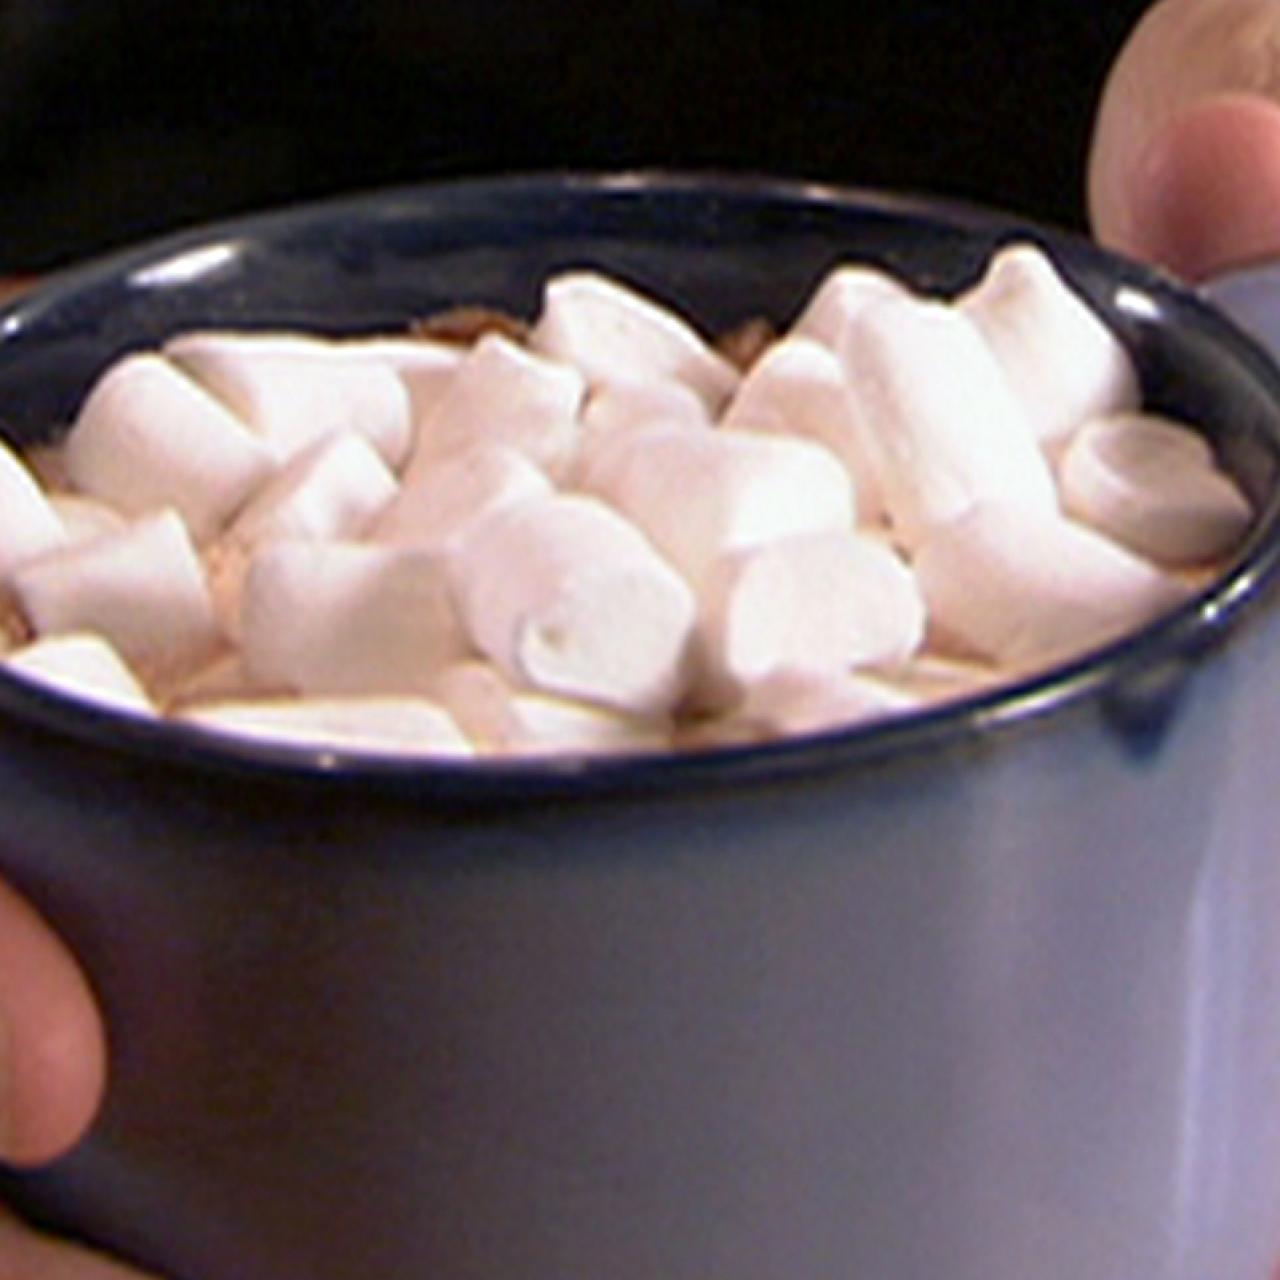 Best Homemade Marshmallows Recipe - How to Make Homemade Marshmallows